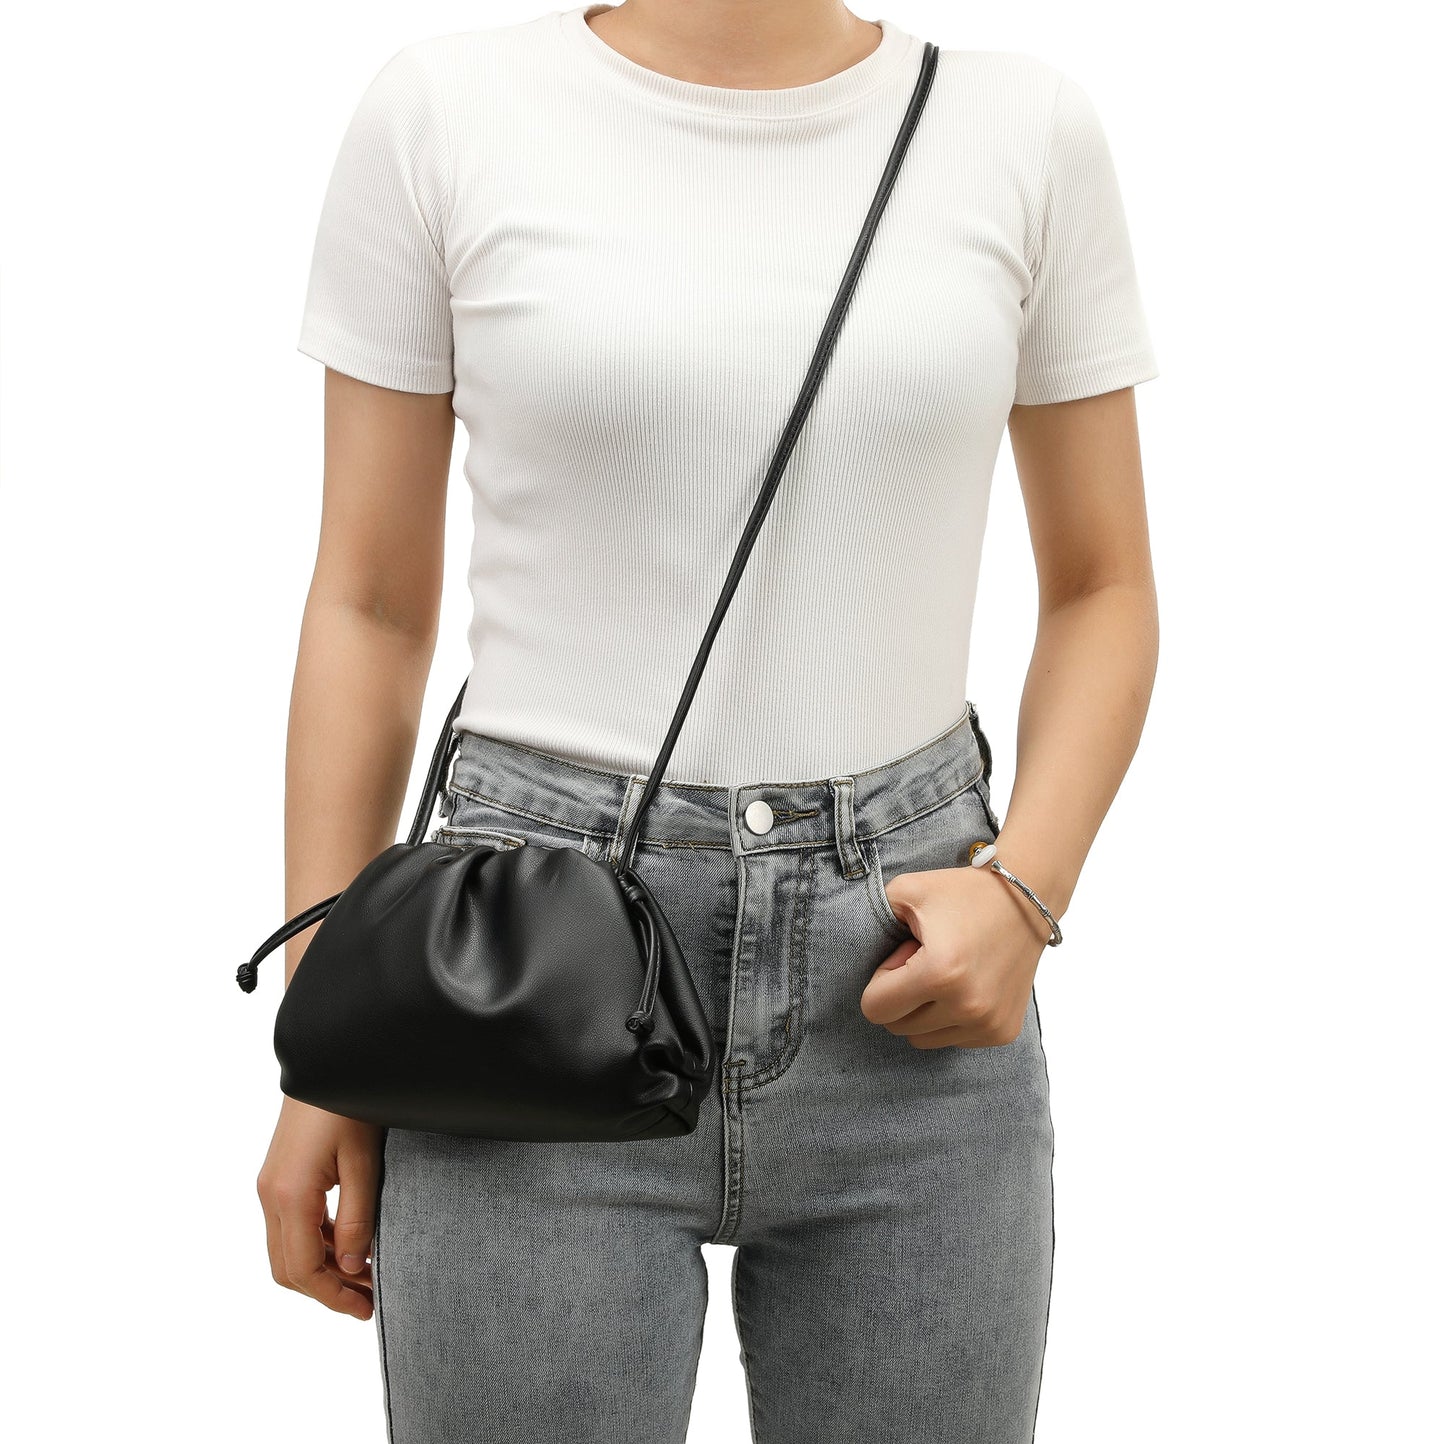 Smooth Leather Pouch/Shoulder Bag